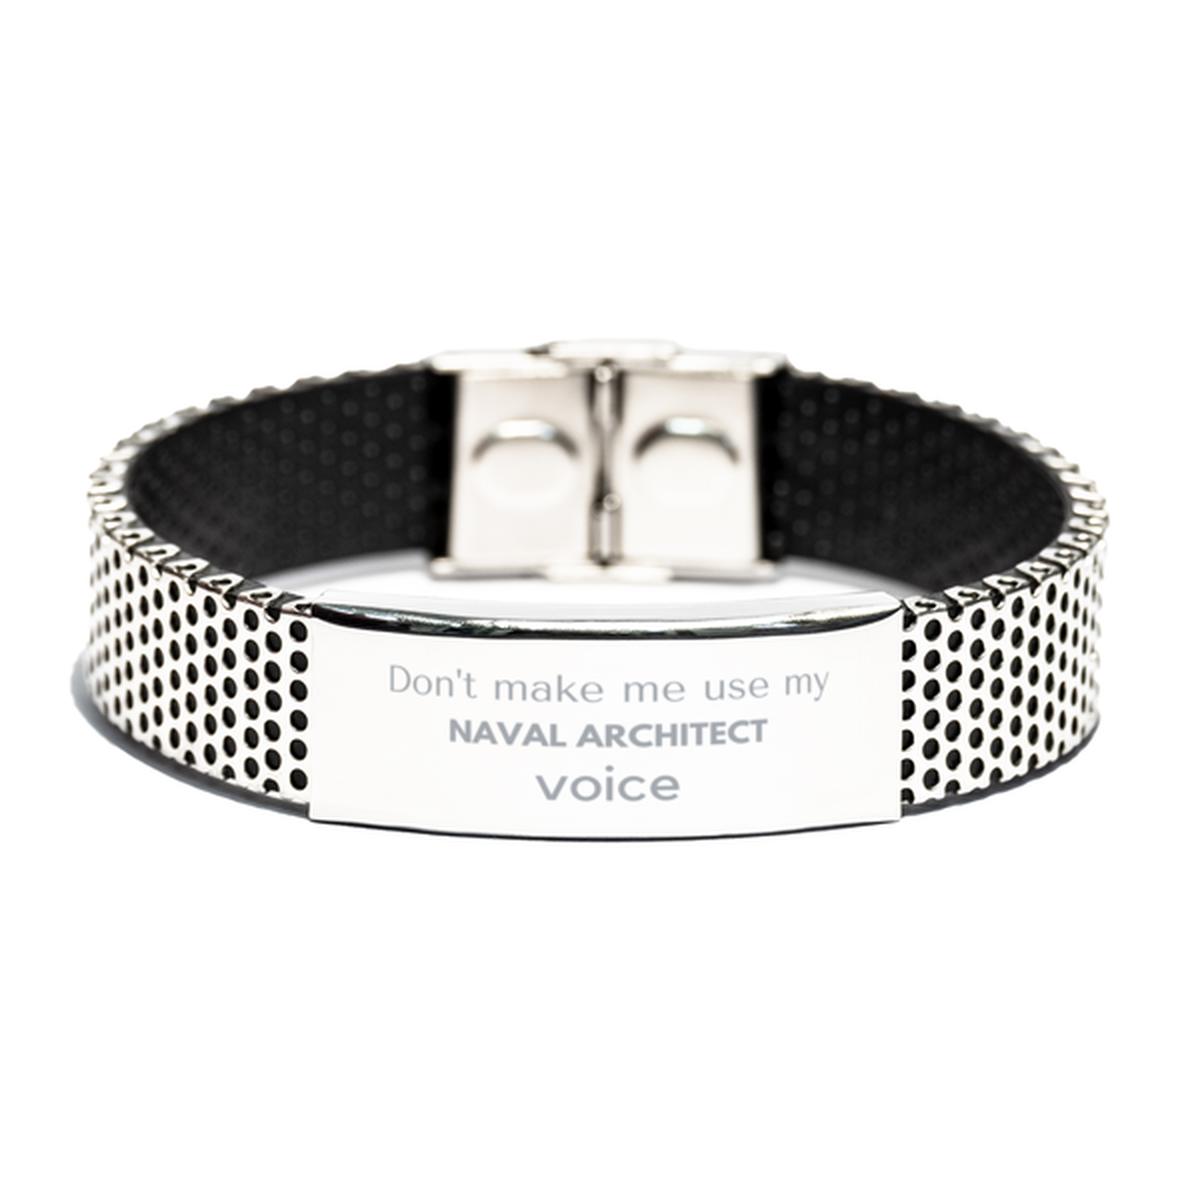 Don't make me use my Naval Architect voice, Sarcasm Naval Architect Gifts, Christmas Naval Architect Stainless Steel Bracelet Birthday Unique Gifts For Naval Architect Coworkers, Men, Women, Colleague, Friends